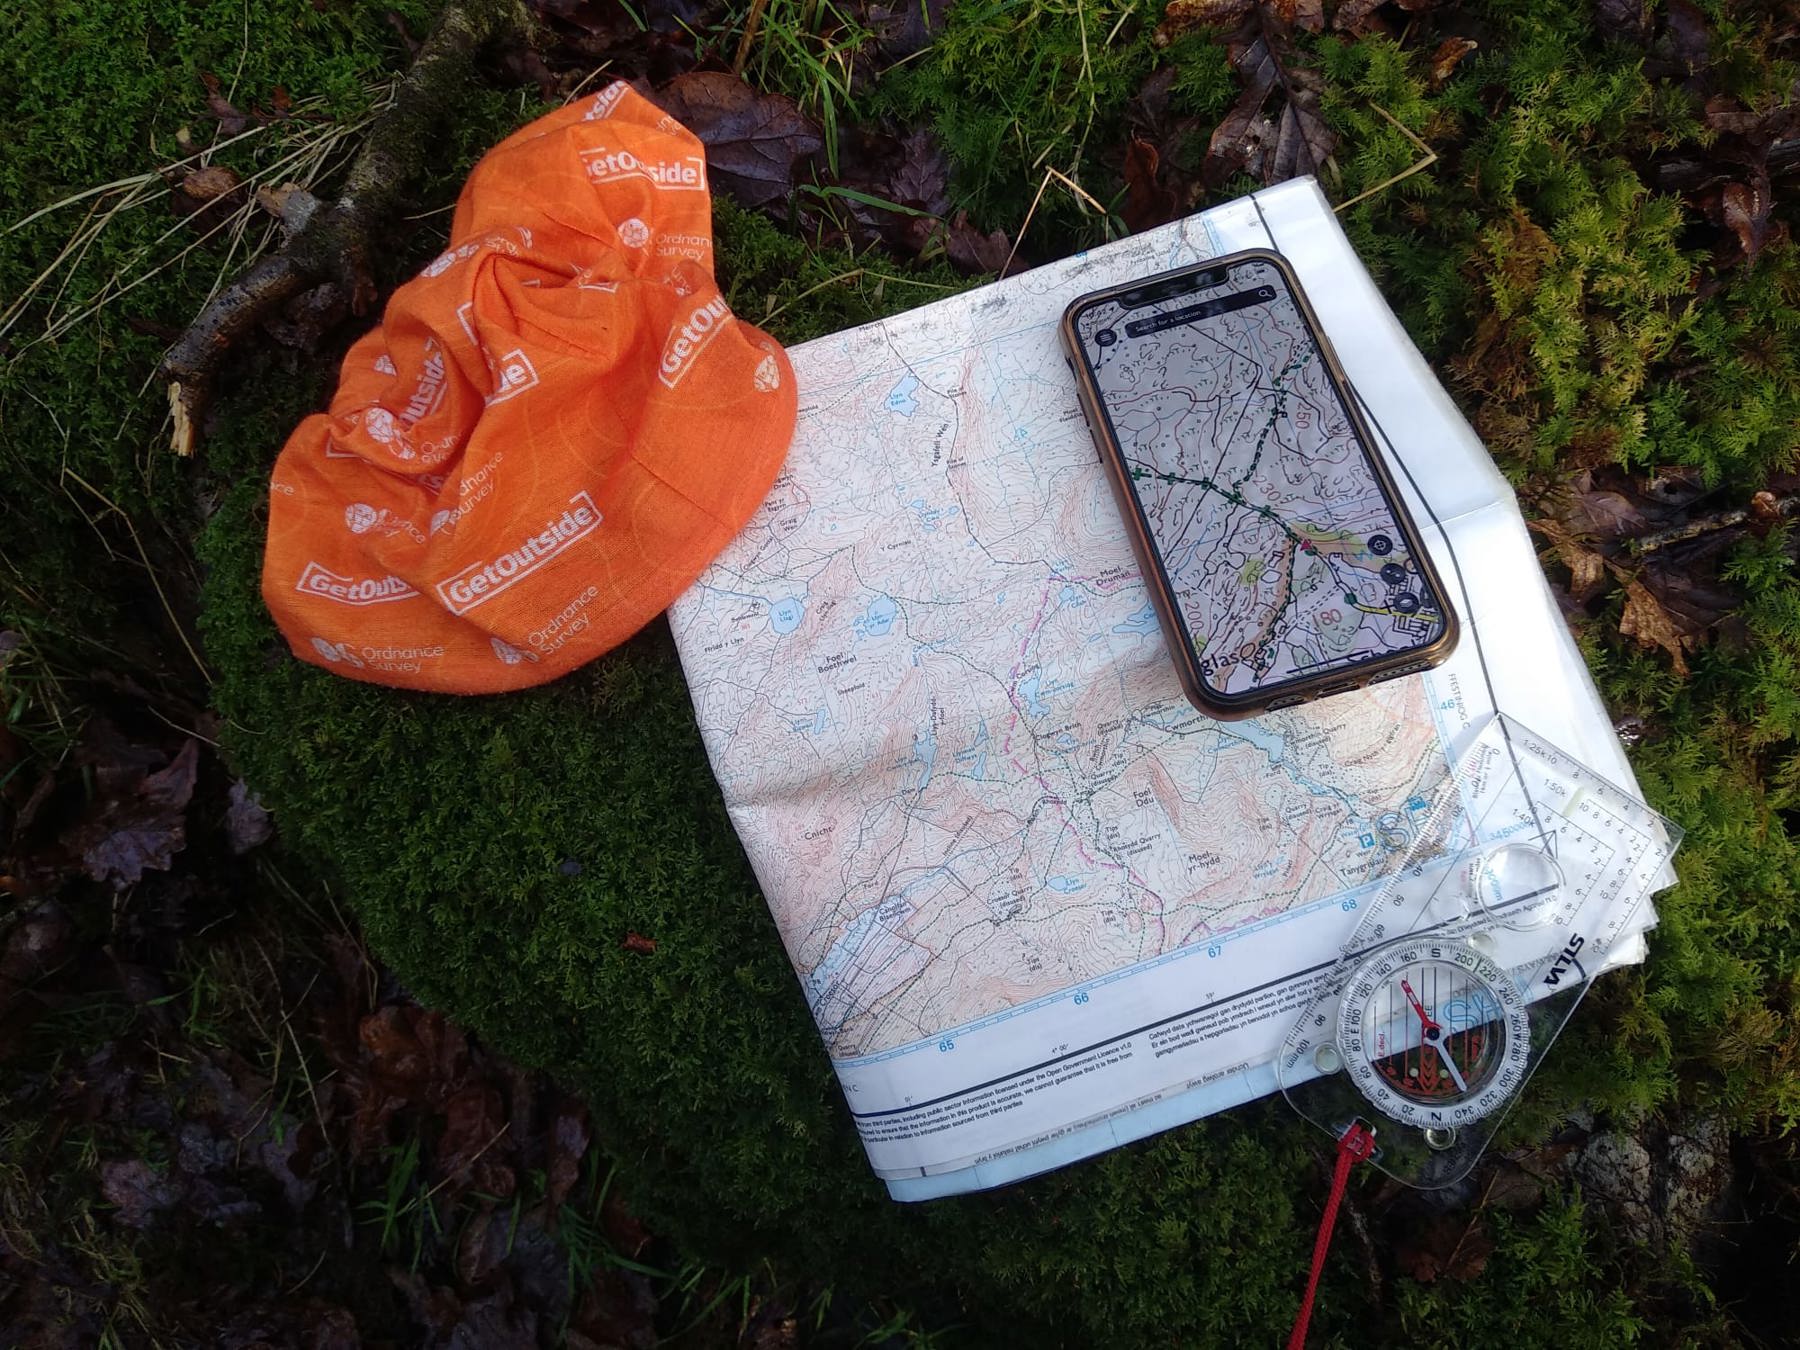 Mahroof’s map is on the ground, on top of some moss, levaes and bark. His compass and phone, with the digital mapping app open, are led on top.